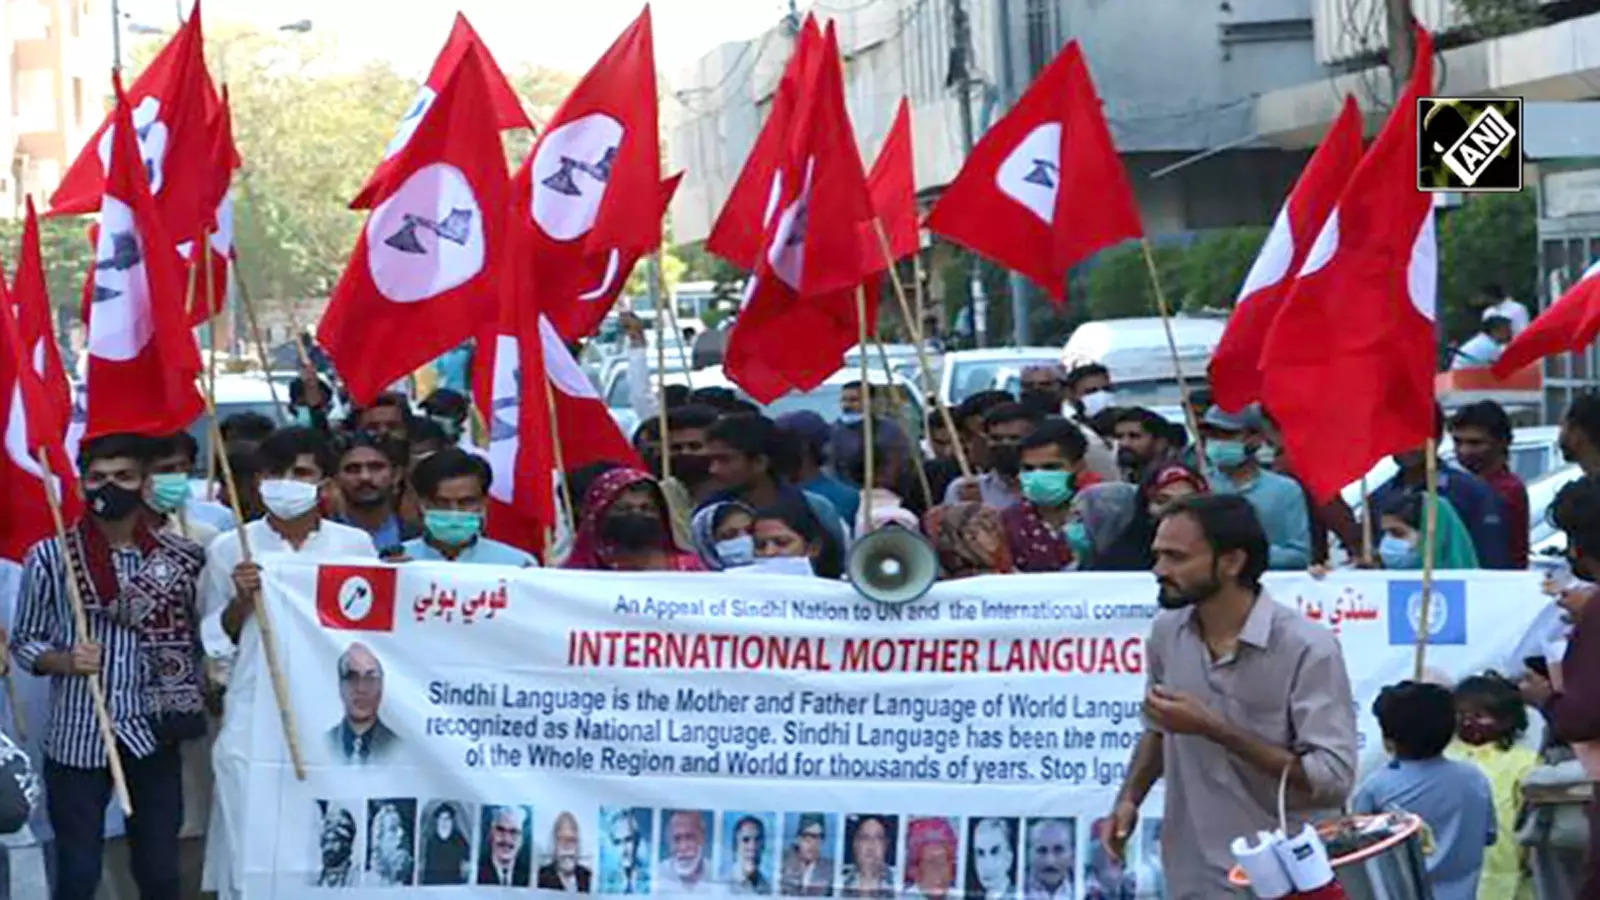 Sindhis demand freedom from Pakistan on International Mother Language Day |  International - Times of India Videos